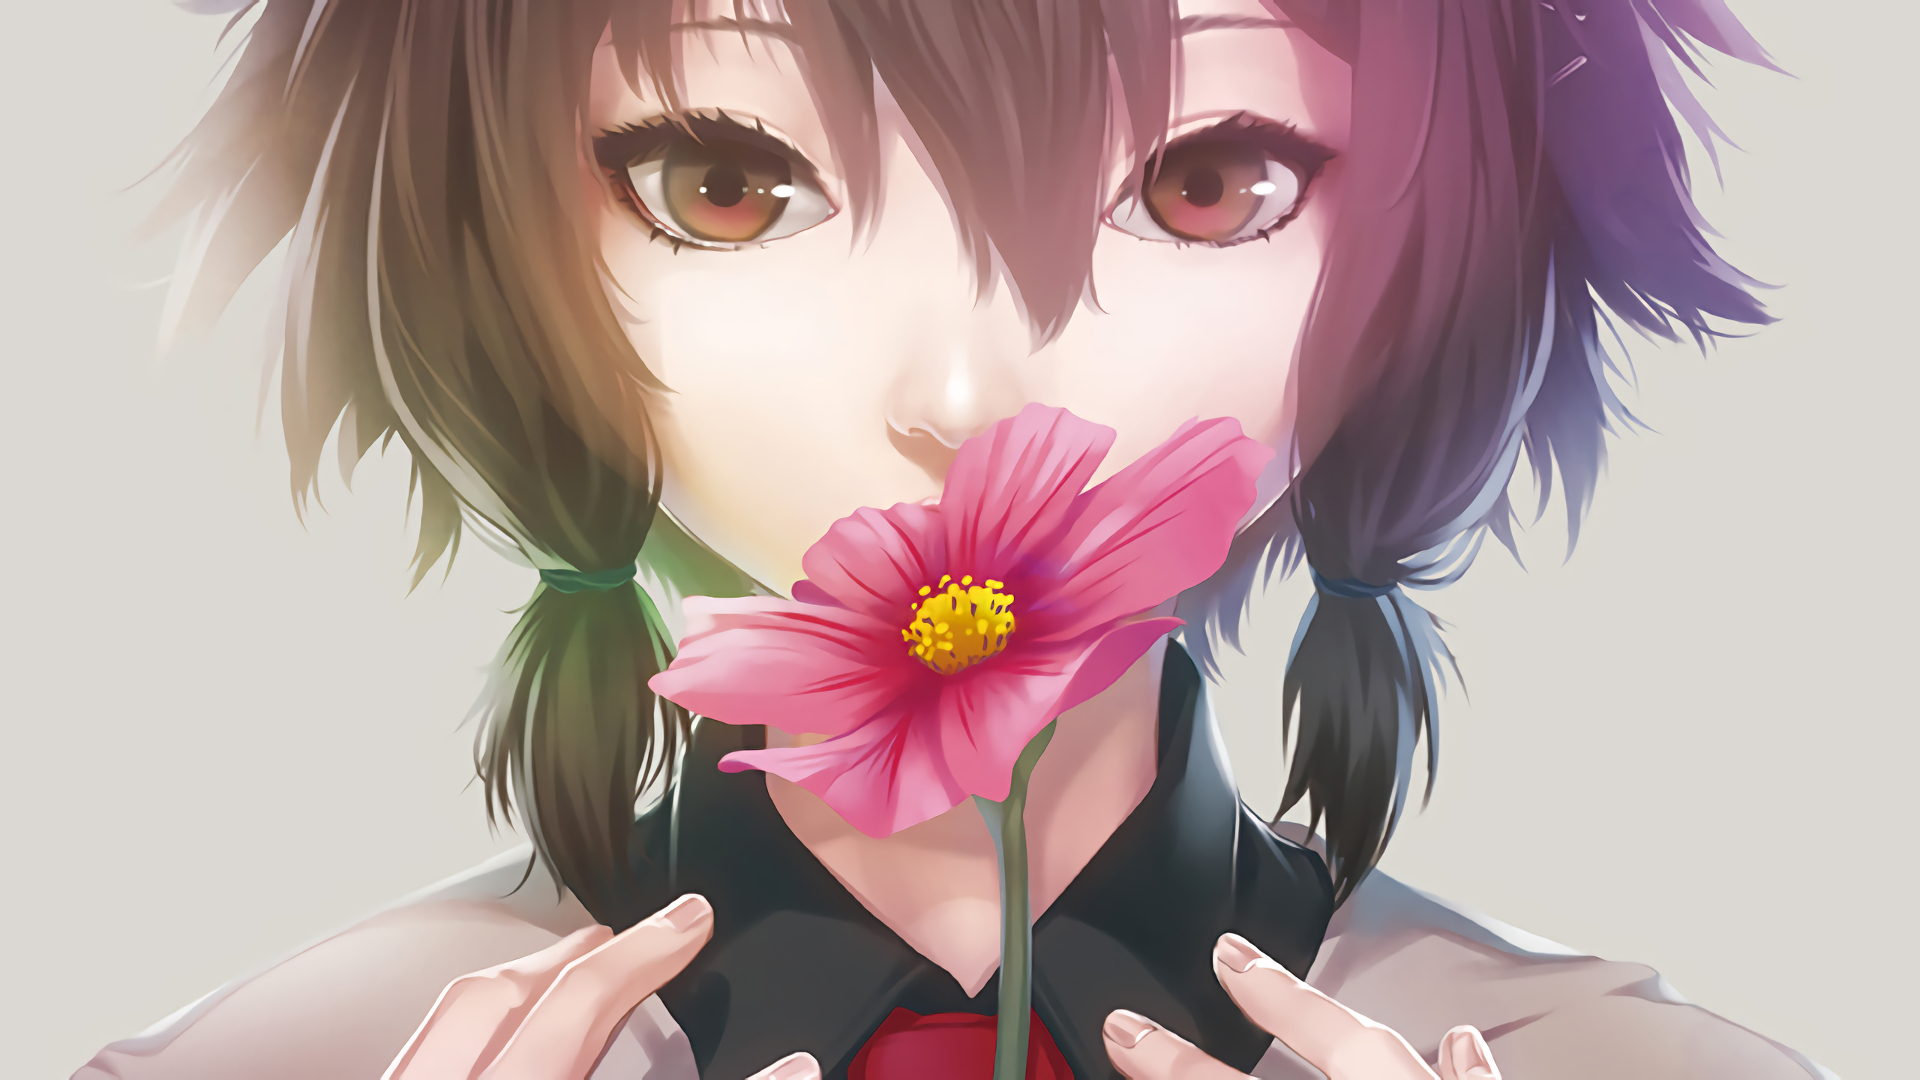 Anime Girl With Flowers In Hair